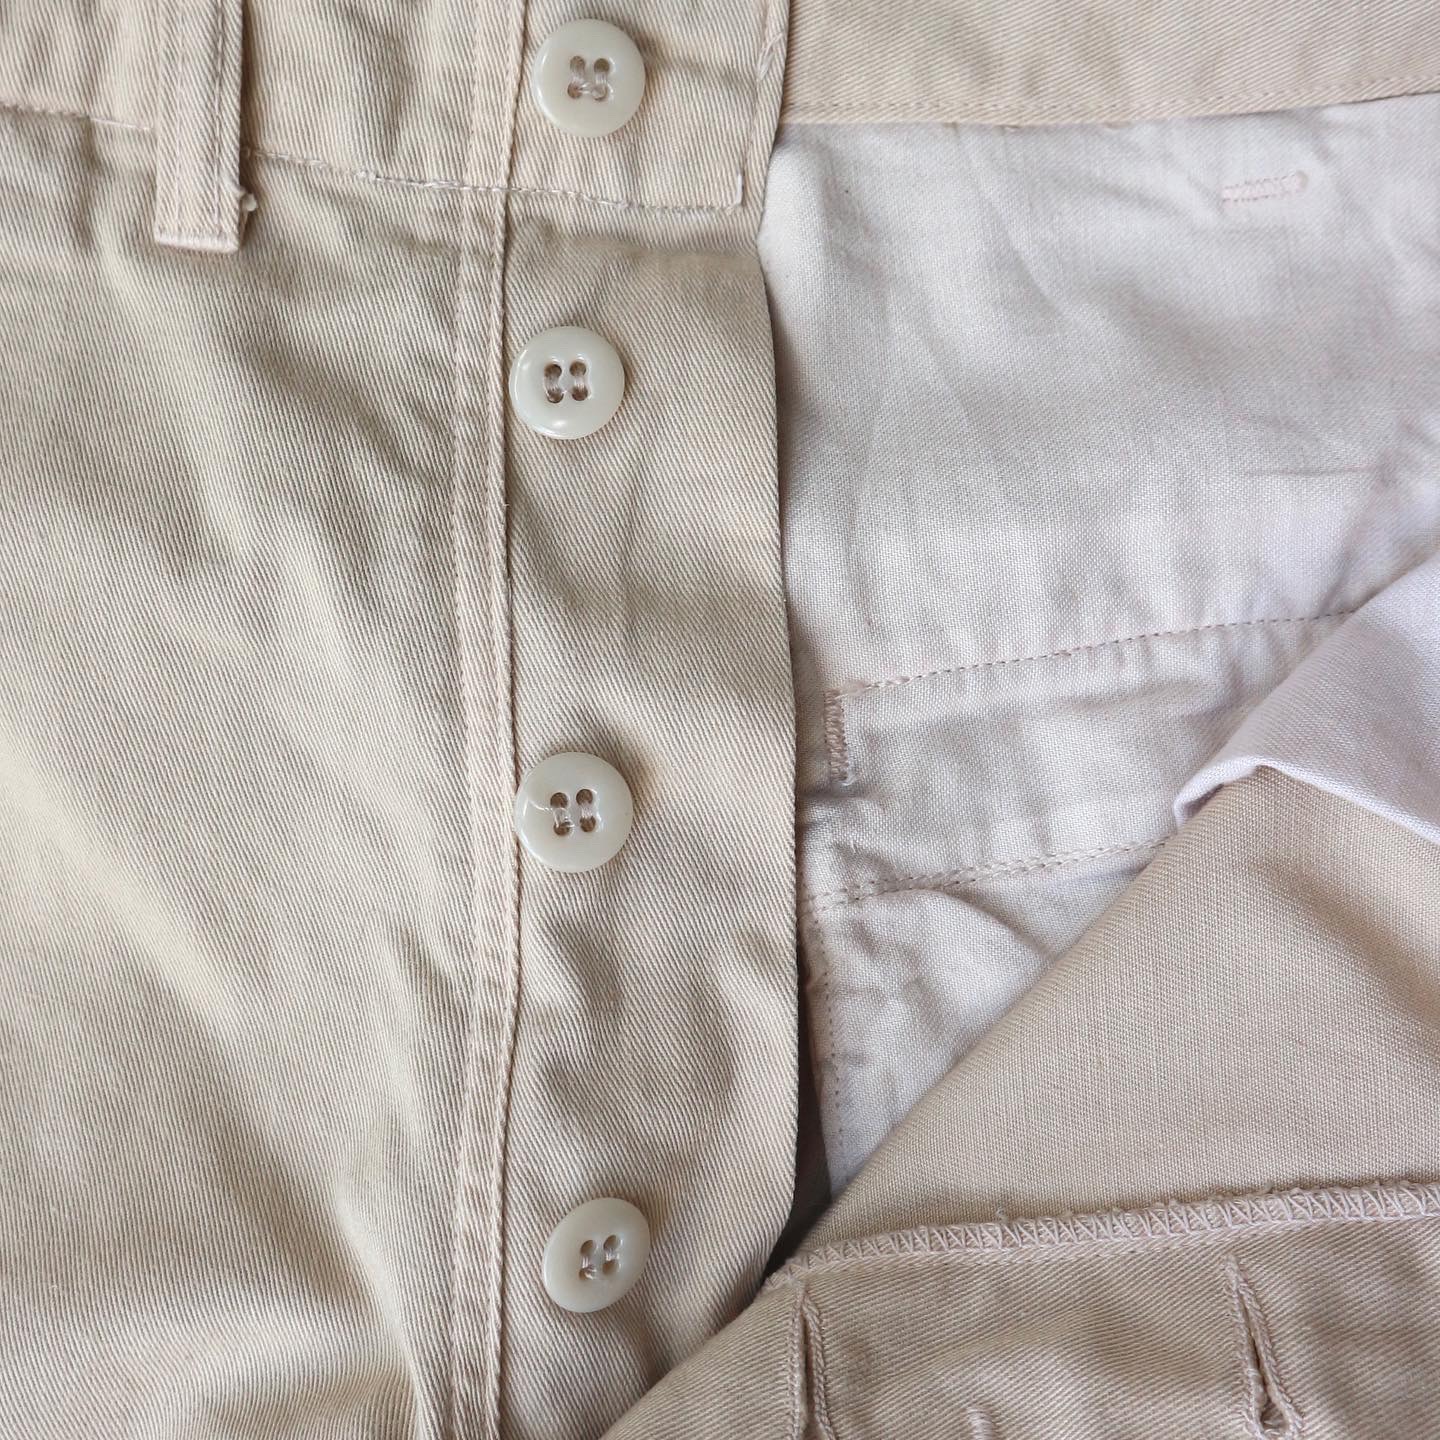 H.W. Carter & Sons Officer Khaki Trousers Size 32